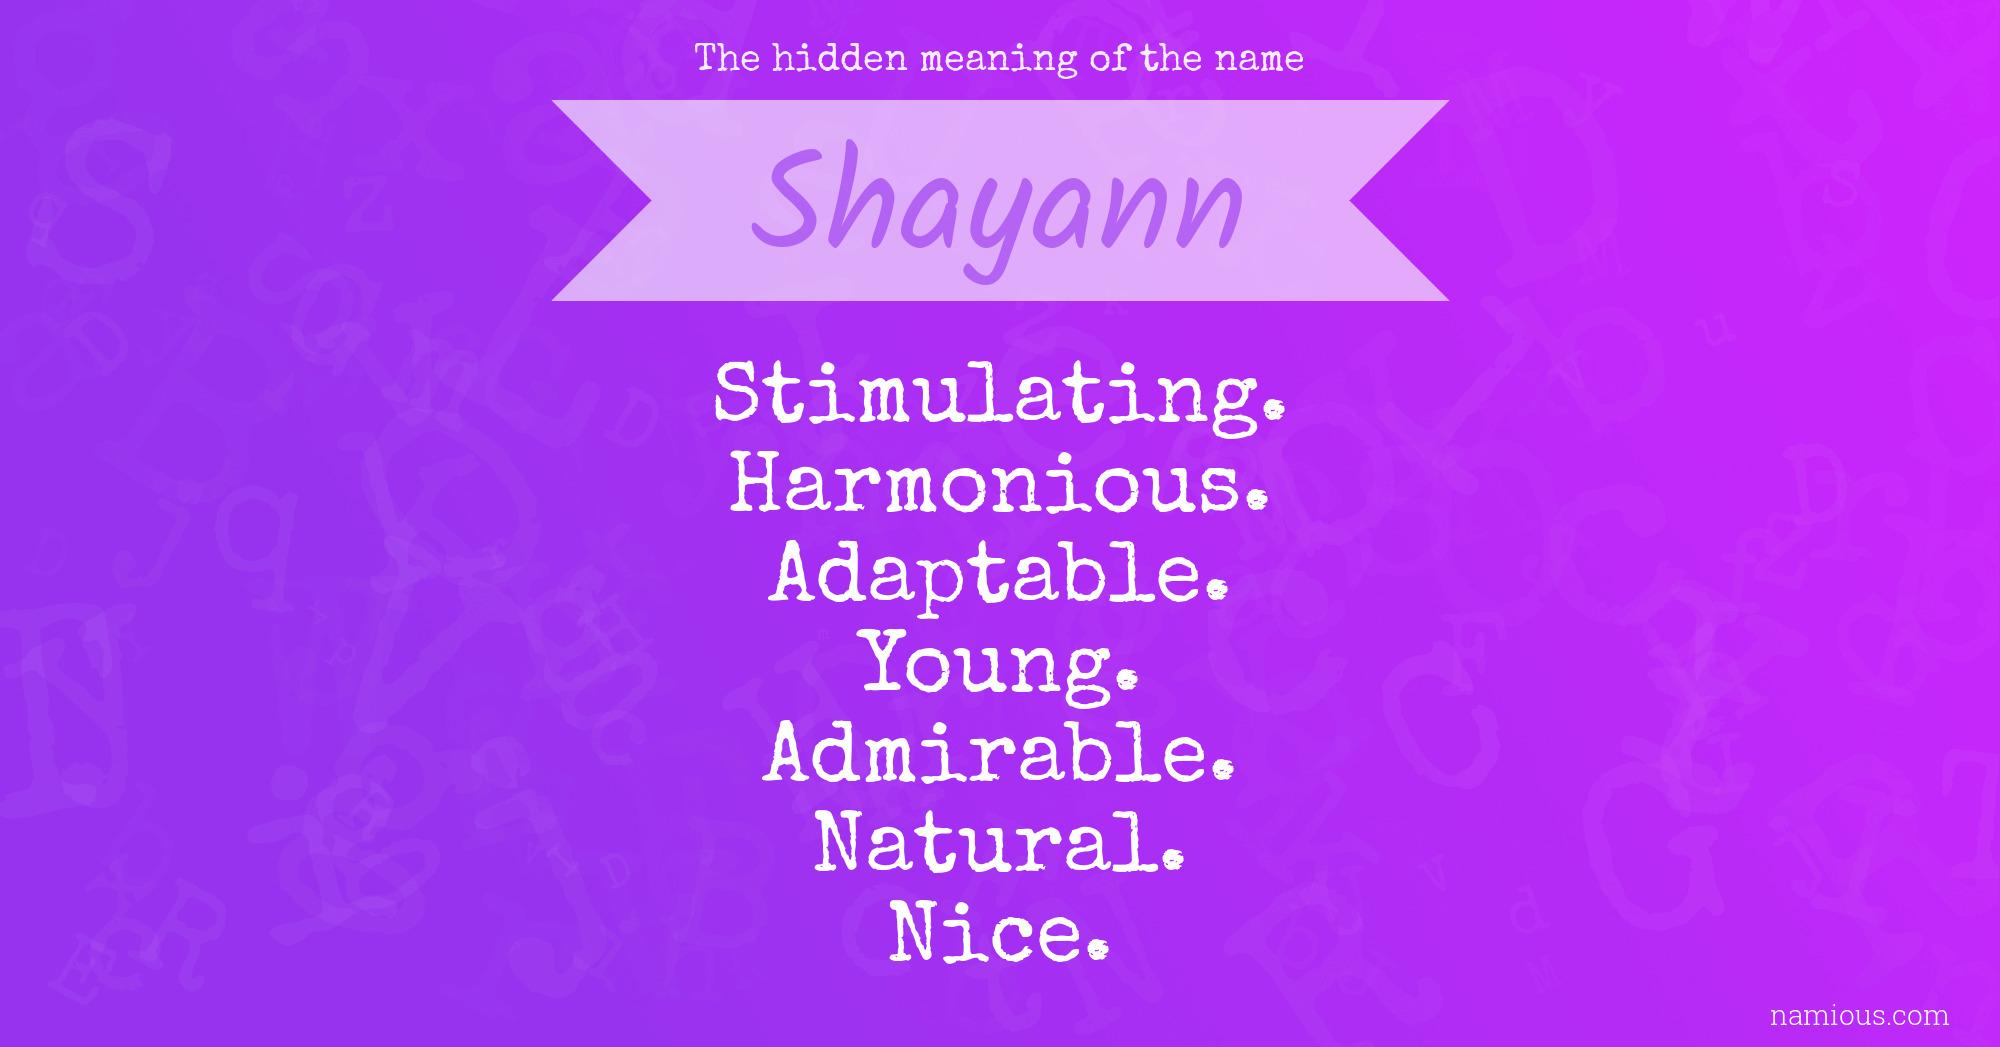 The hidden meaning of the name Shayann